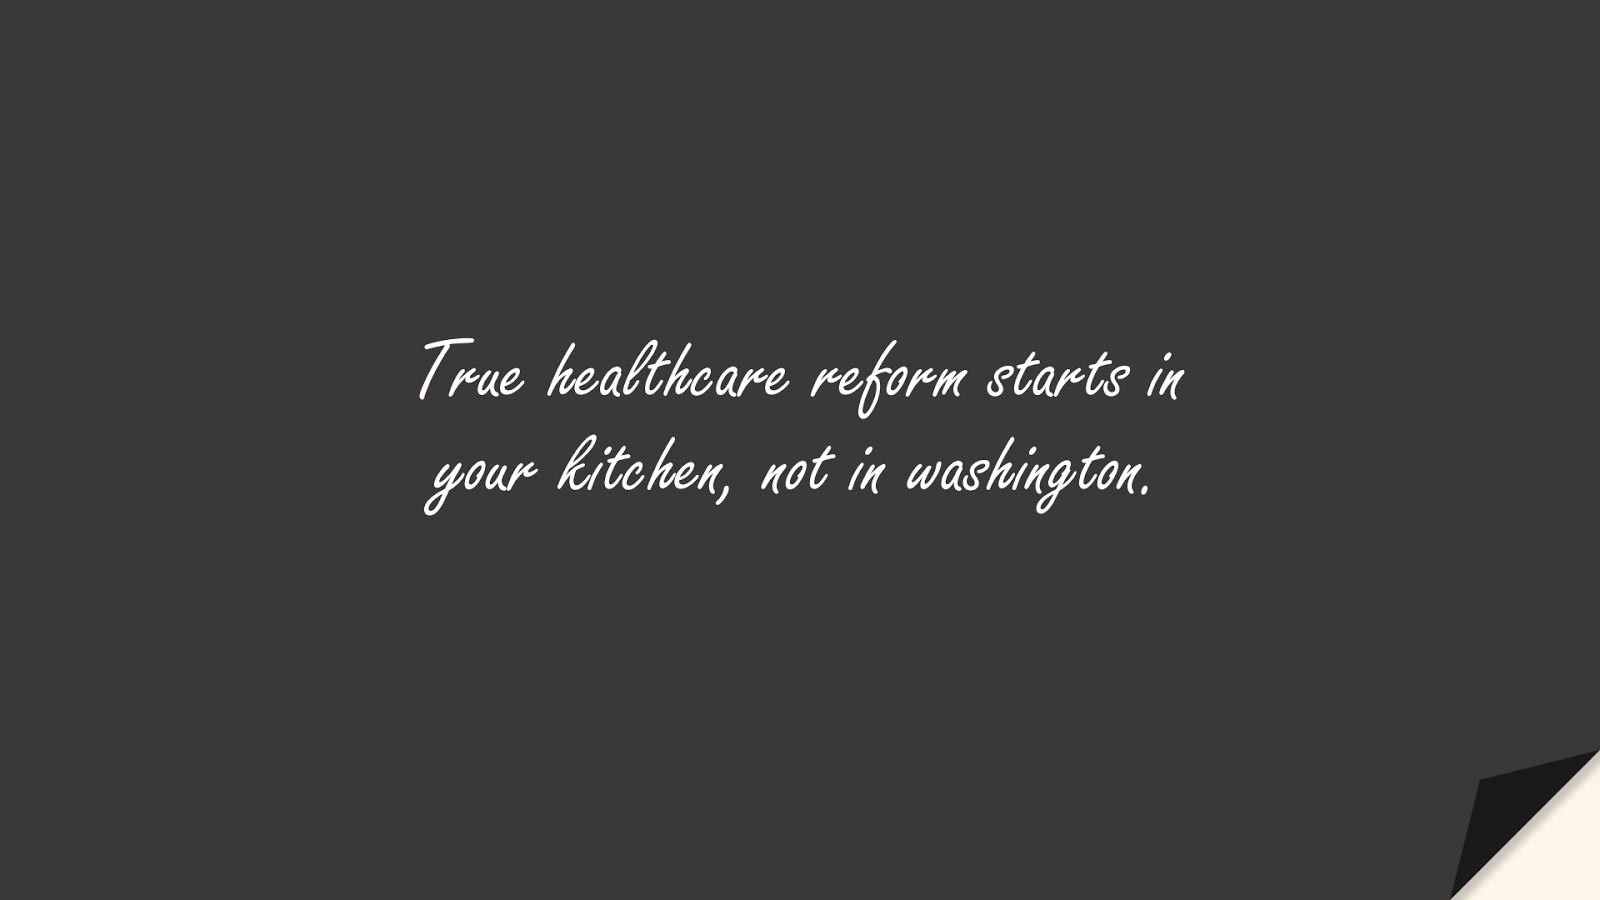 True healthcare reform starts in your kitchen, not in washington.FALSE